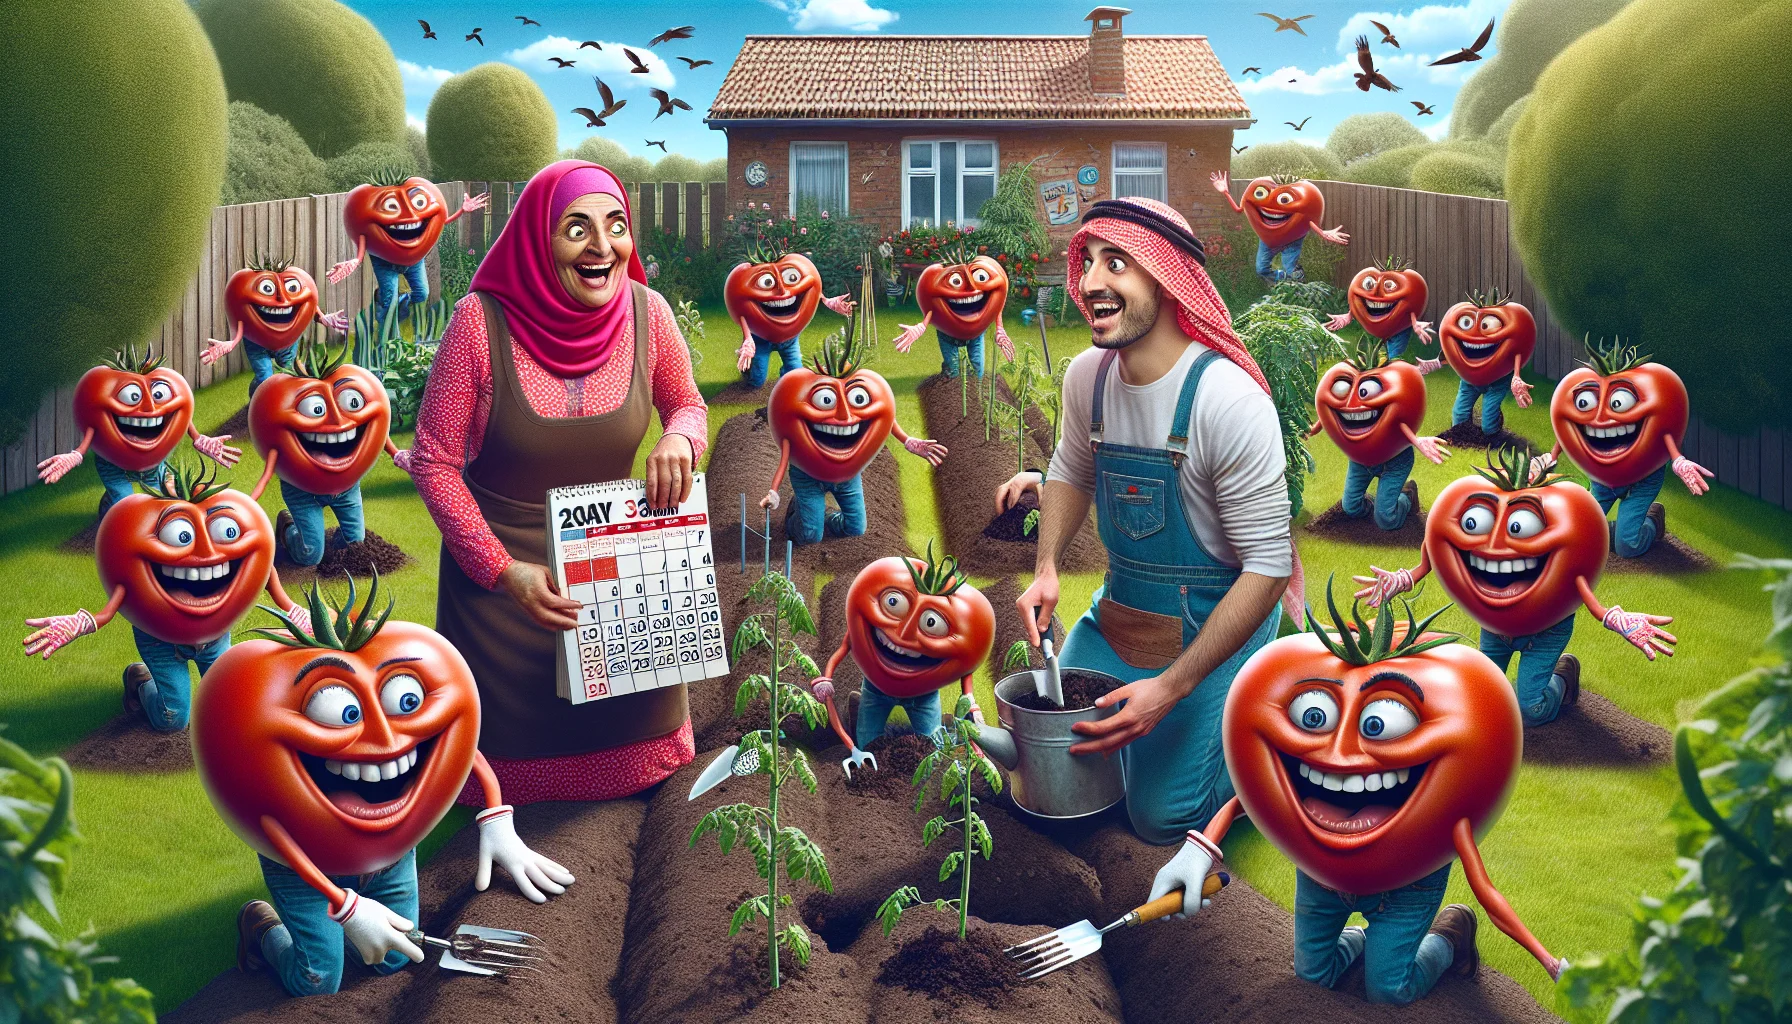 Create an image showcasing a humorous gardening scenario meant to encourage people to engage in gardening. The setting is a sunny backyard garden filled with various plants. At the center of the scene, a Middle-Eastern woman and Caucasian man, both in colorful gardening outfits, are joyfully engaged in planting tomatoes. They stand amidst a crowd of animated, anthropomorphic tomato plants, who are holding calendar pages indicating the appropriate planting season. The tomatoes have exaggerated happy faces and are playfully pointing at the calendar pages. The sky is clear and birds are chirping in the background, signaling a beautiful day for gardening.